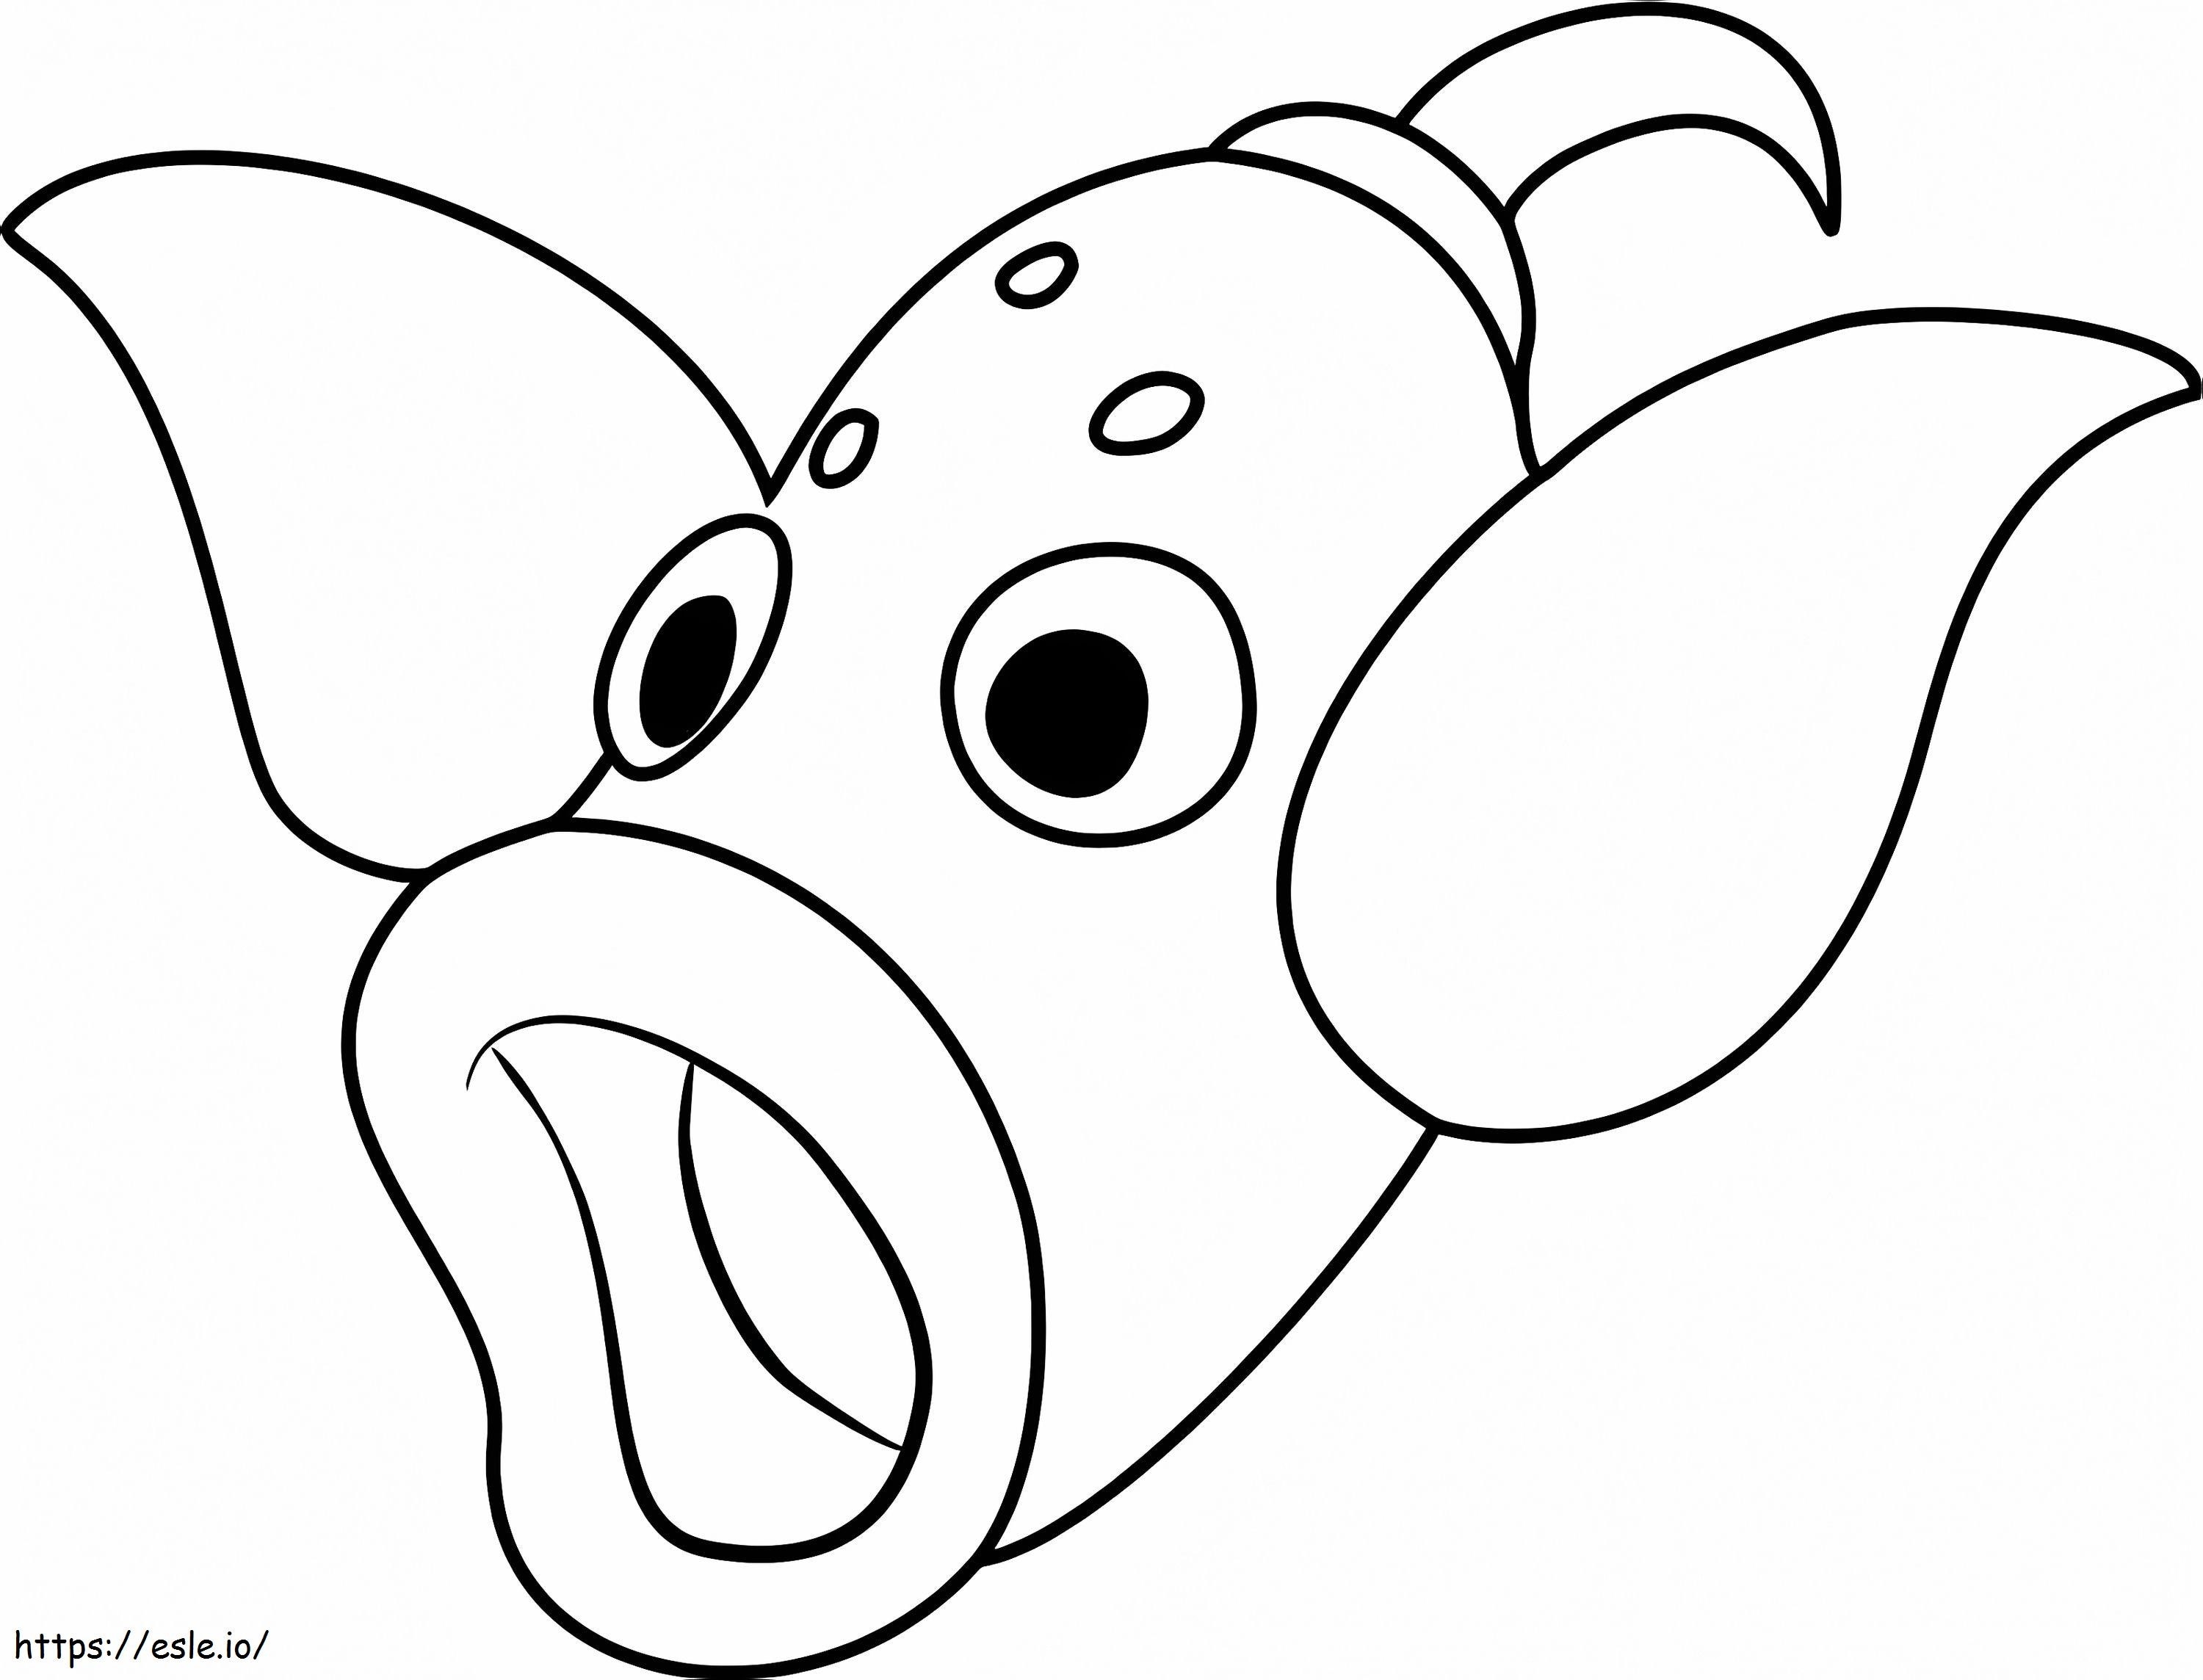 Pokemon Weepinbell coloring page